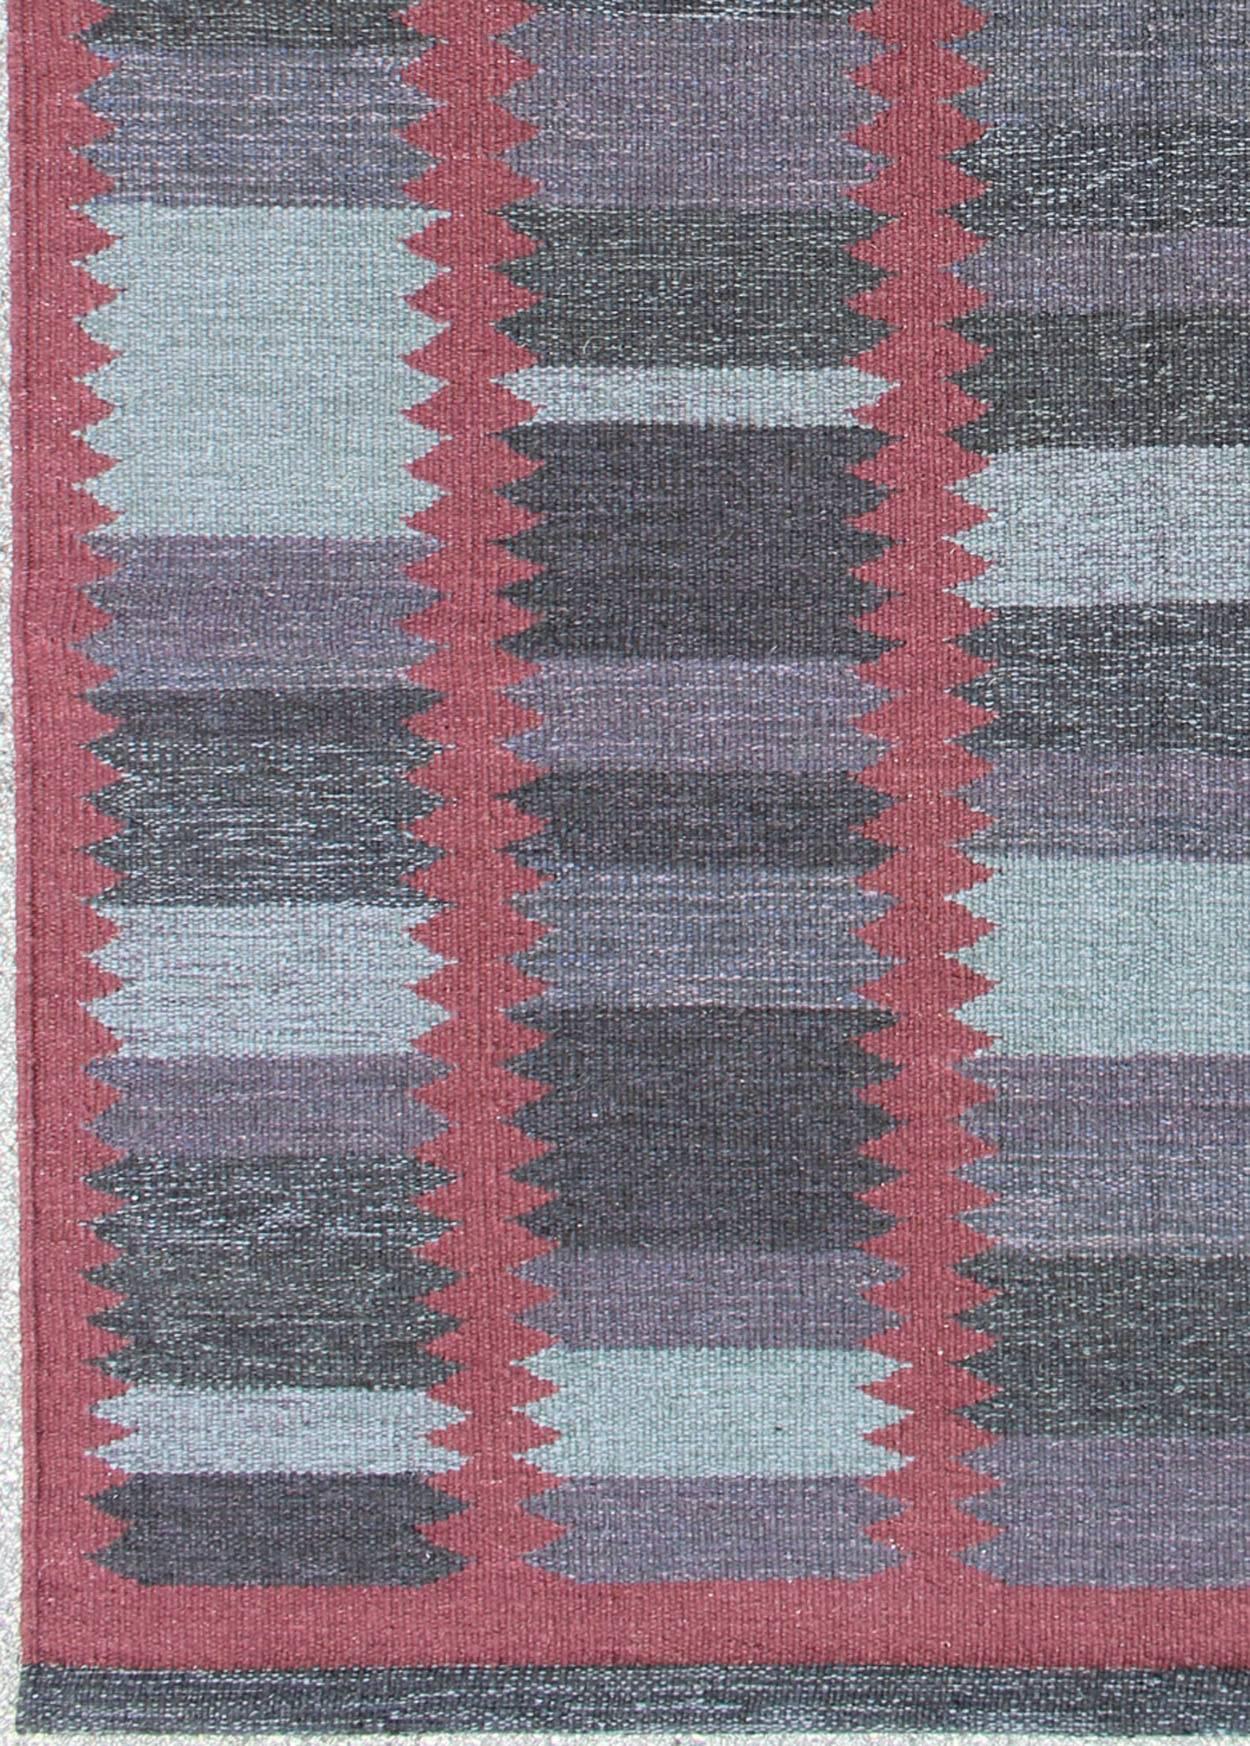 This Scandinavian flat-weave patterned rug is inspired by the work of Swedish textile designers of the early to mid-20th century. With a unique blend of historical and modern design, this dynamic and exciting composition is beautifully suited for